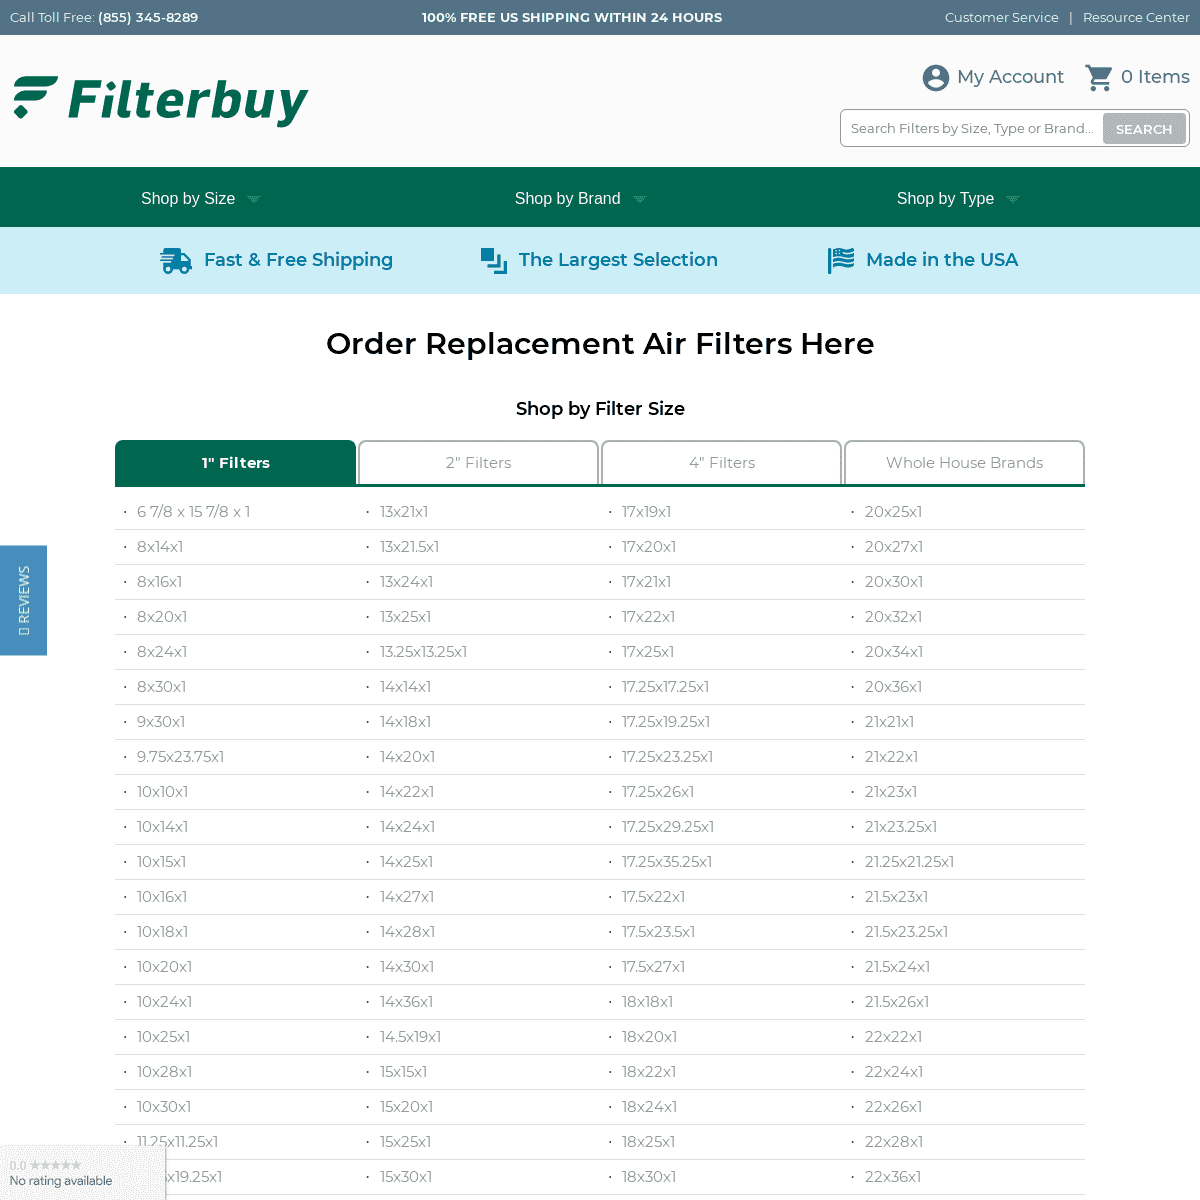 A complete backup of https://filterbuy.com